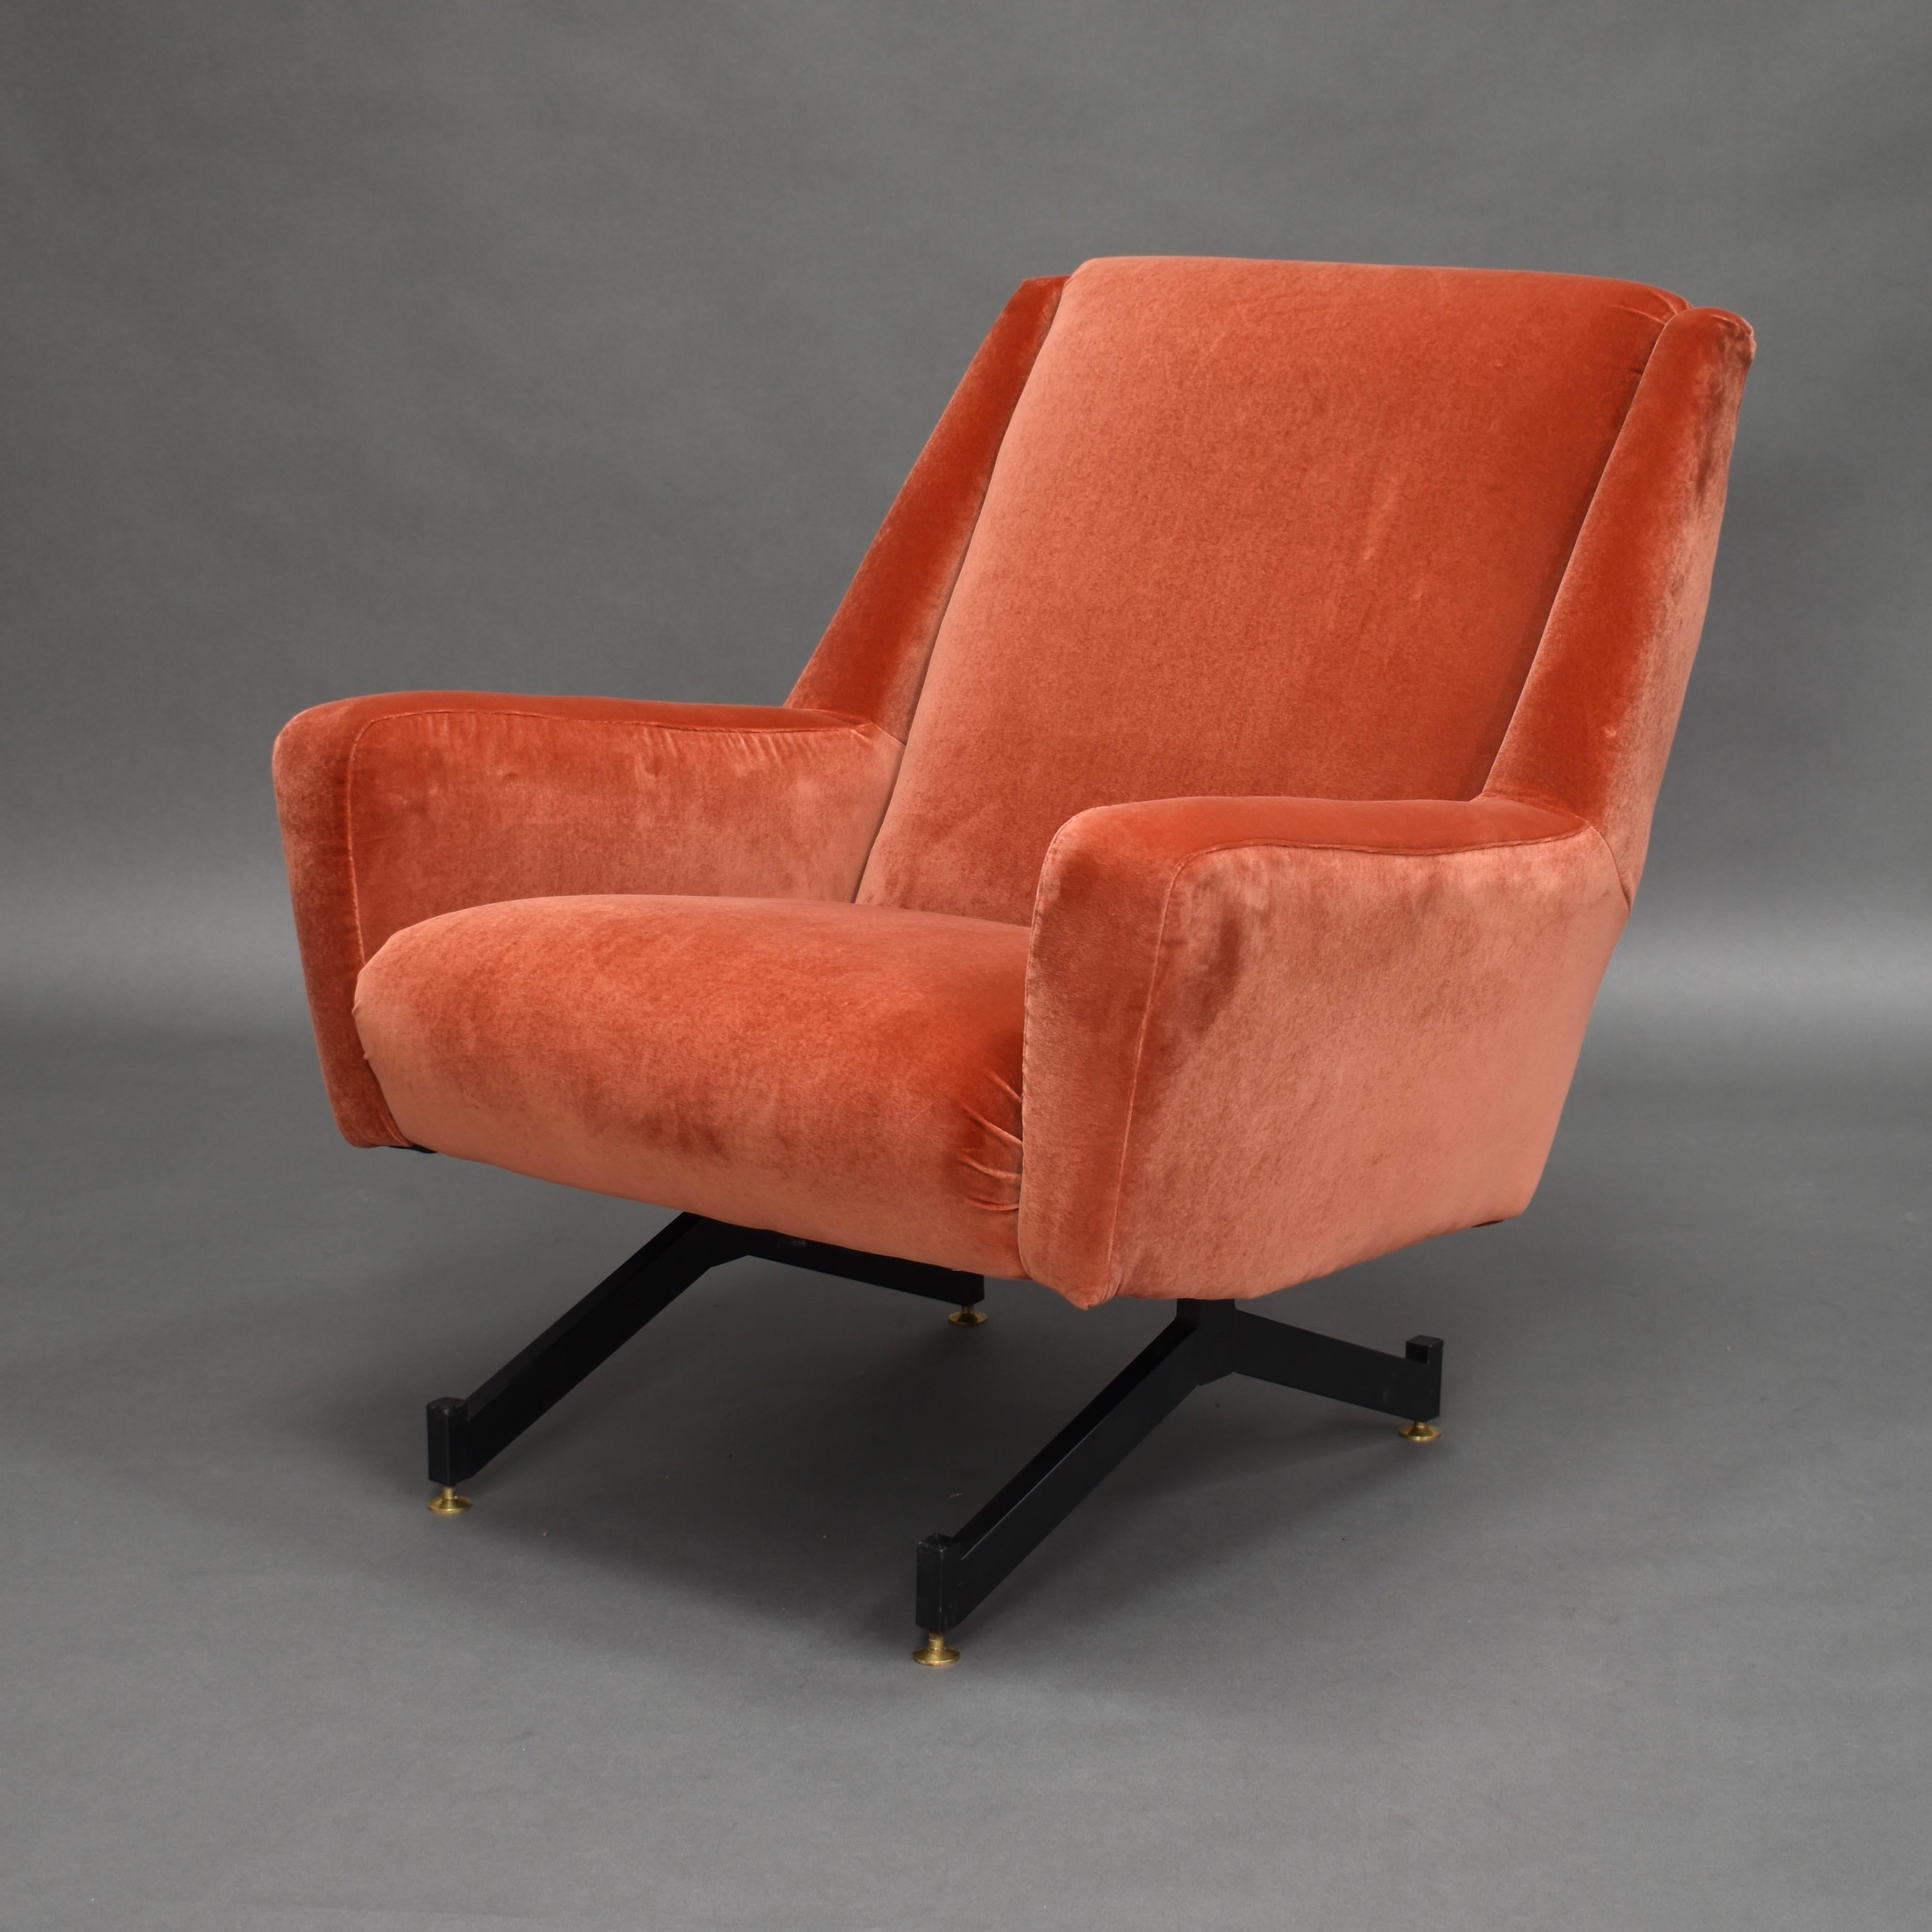 Gorgeous Italian armchair with new copper pink velvet upholstery.

It features a black lacquered metal base and four brass feet that can be adjusted in height by turning the feet (for leveling). The metal base gives the chair a floating